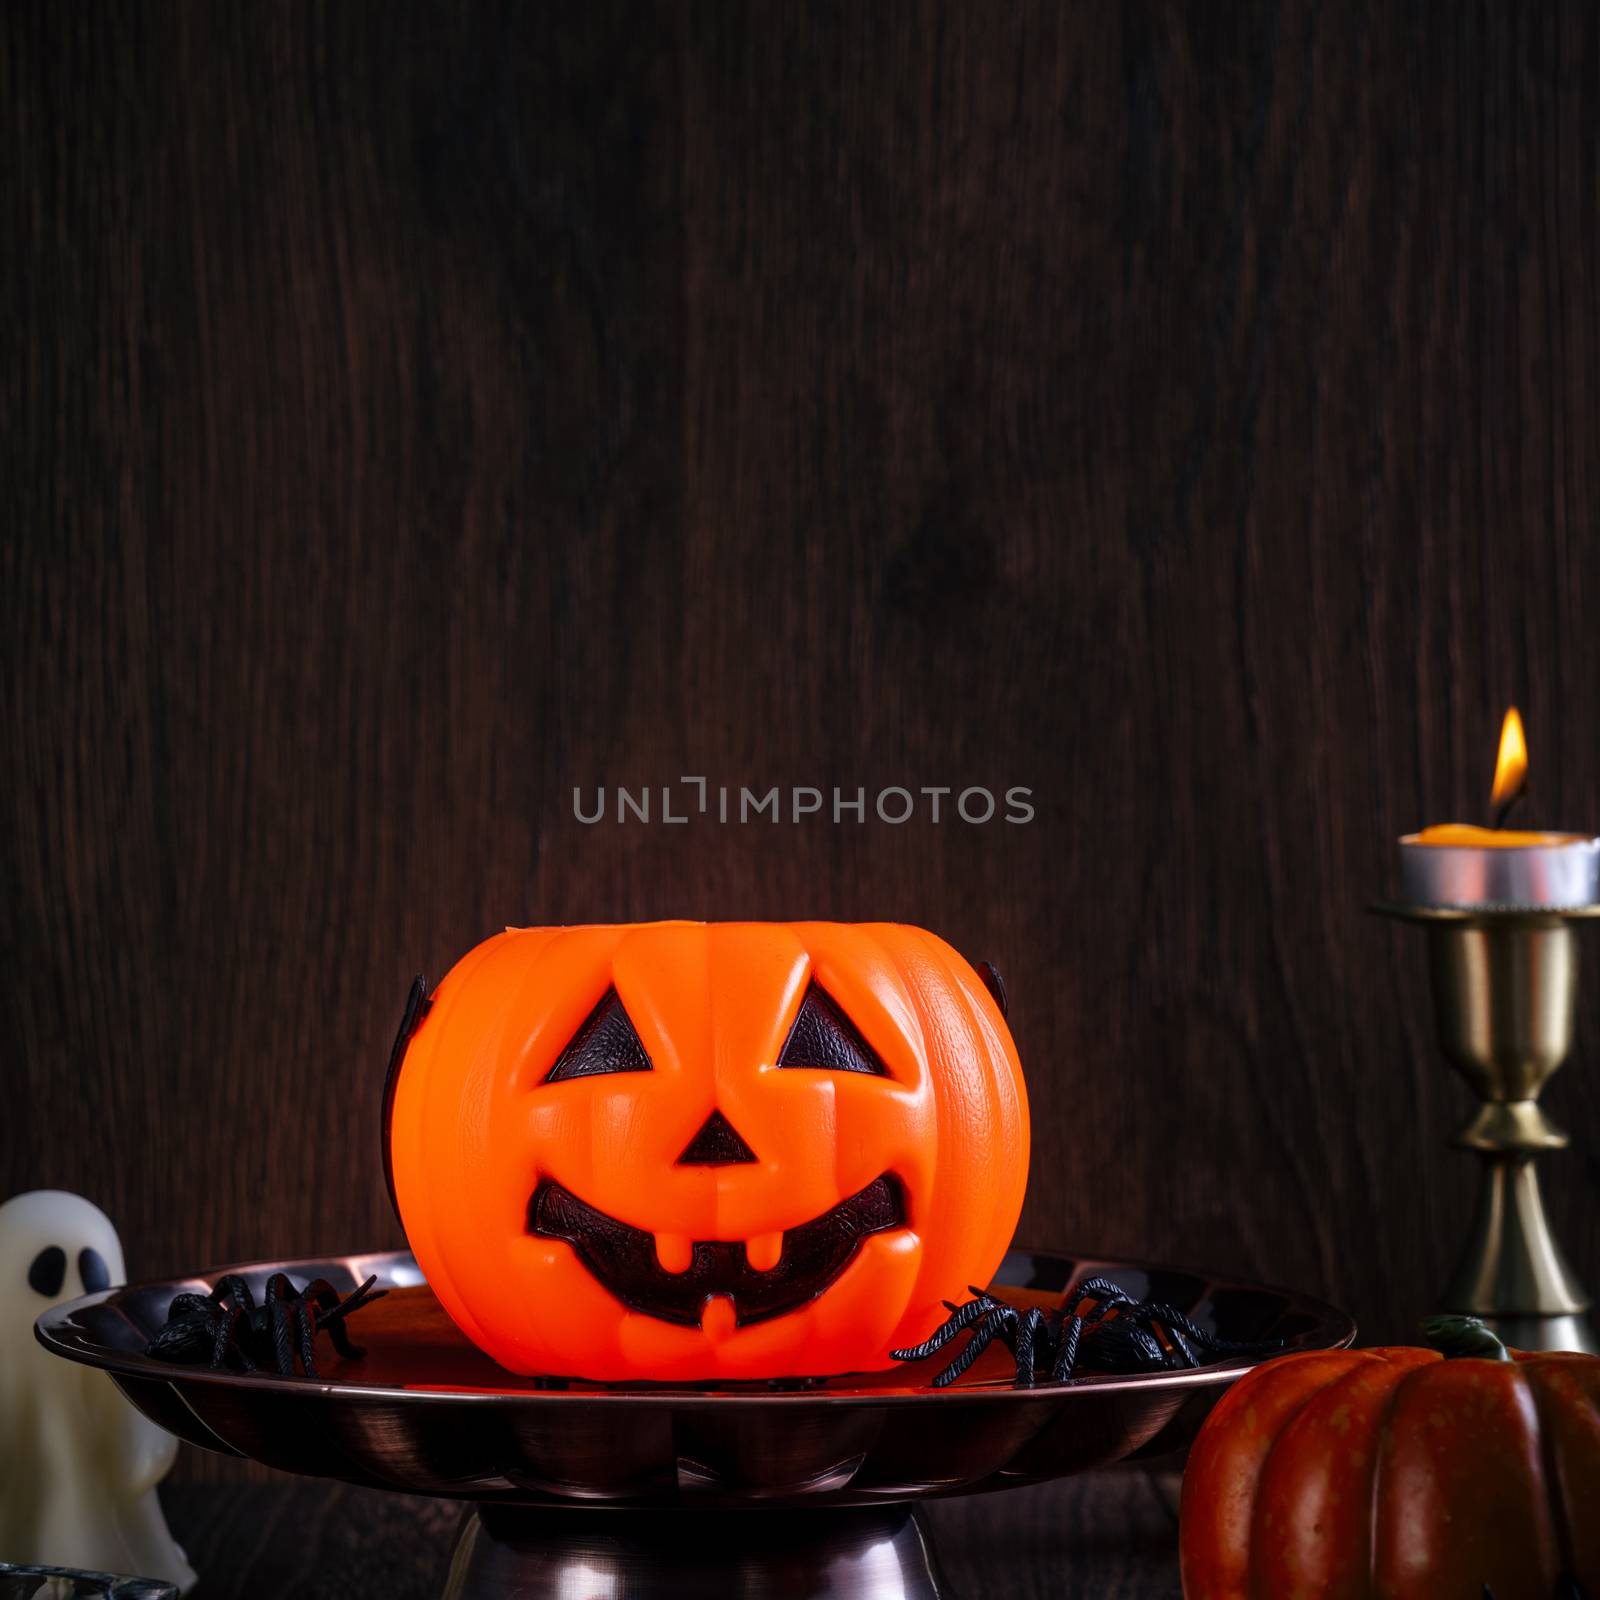 Close up of spooky Halloween tricks, concept of horror festival decor, pumpkin lantern with candlestick and smoke.